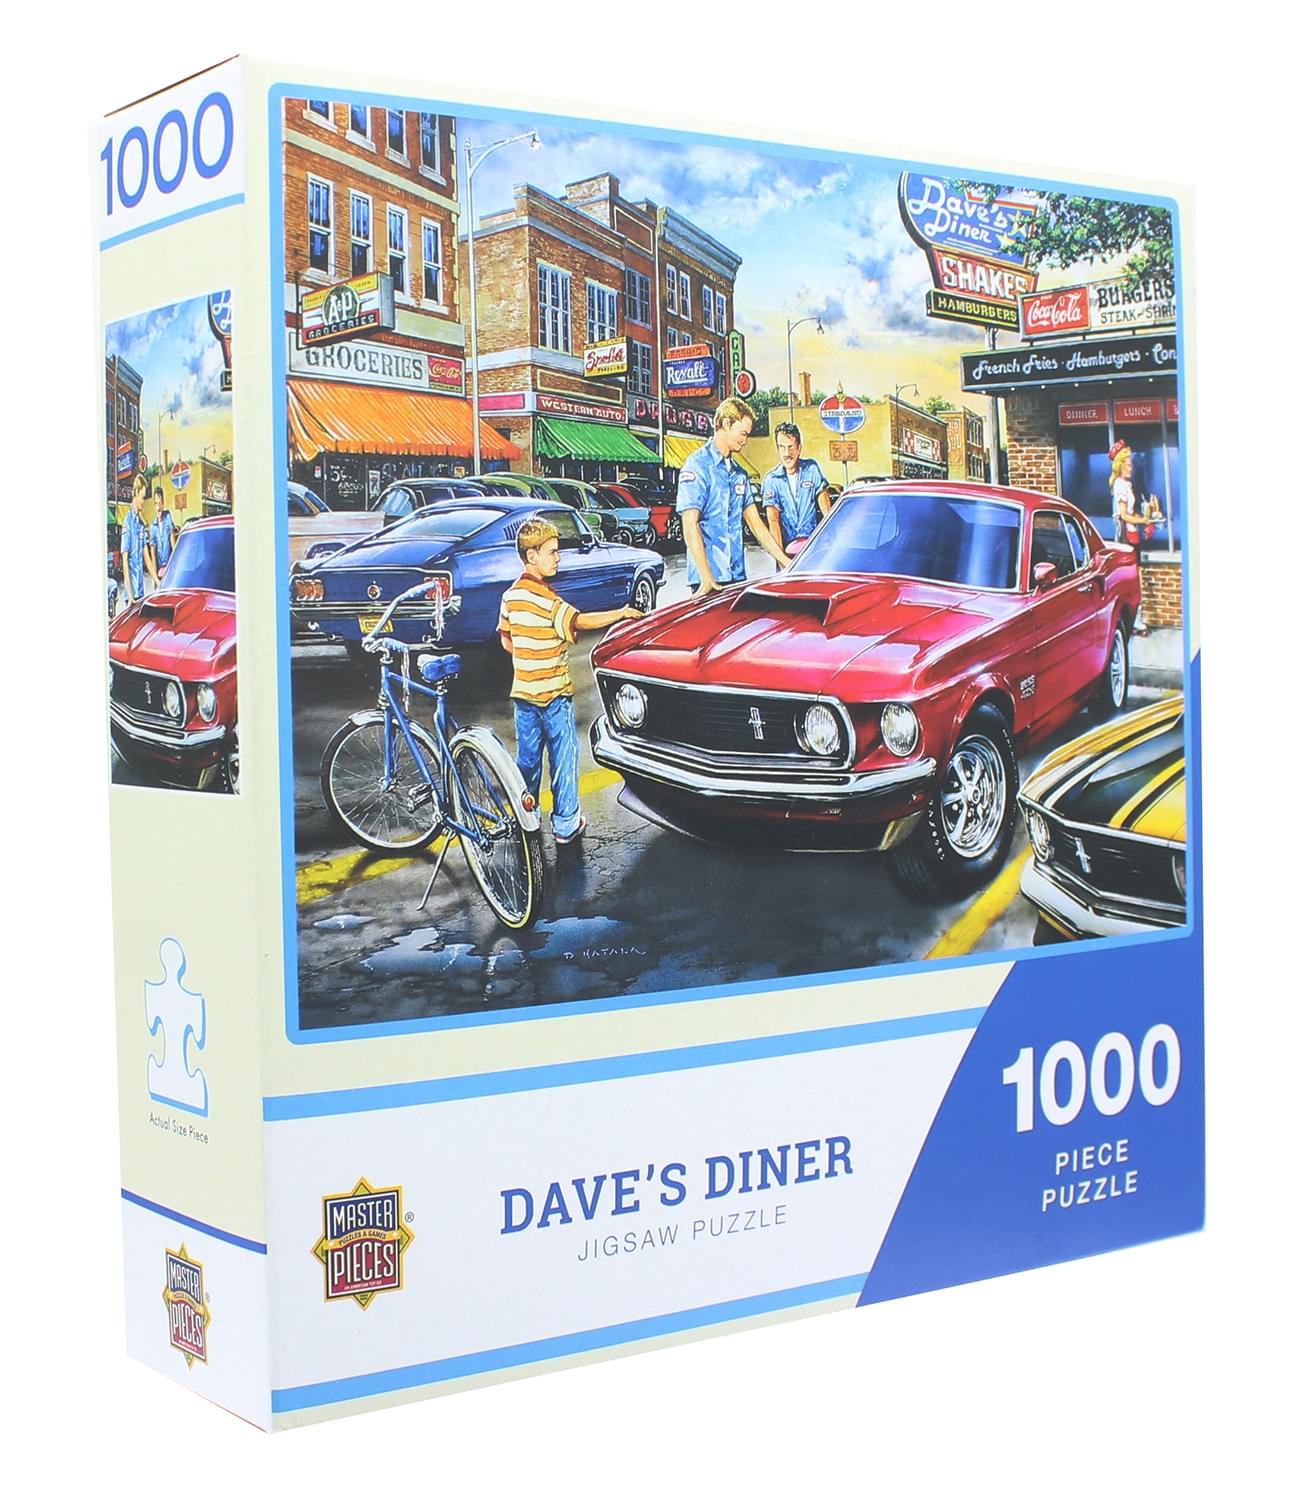 MasterPieces 1000 Piece Jigsaw Puzzle | Daves Diner by Dan Hatala